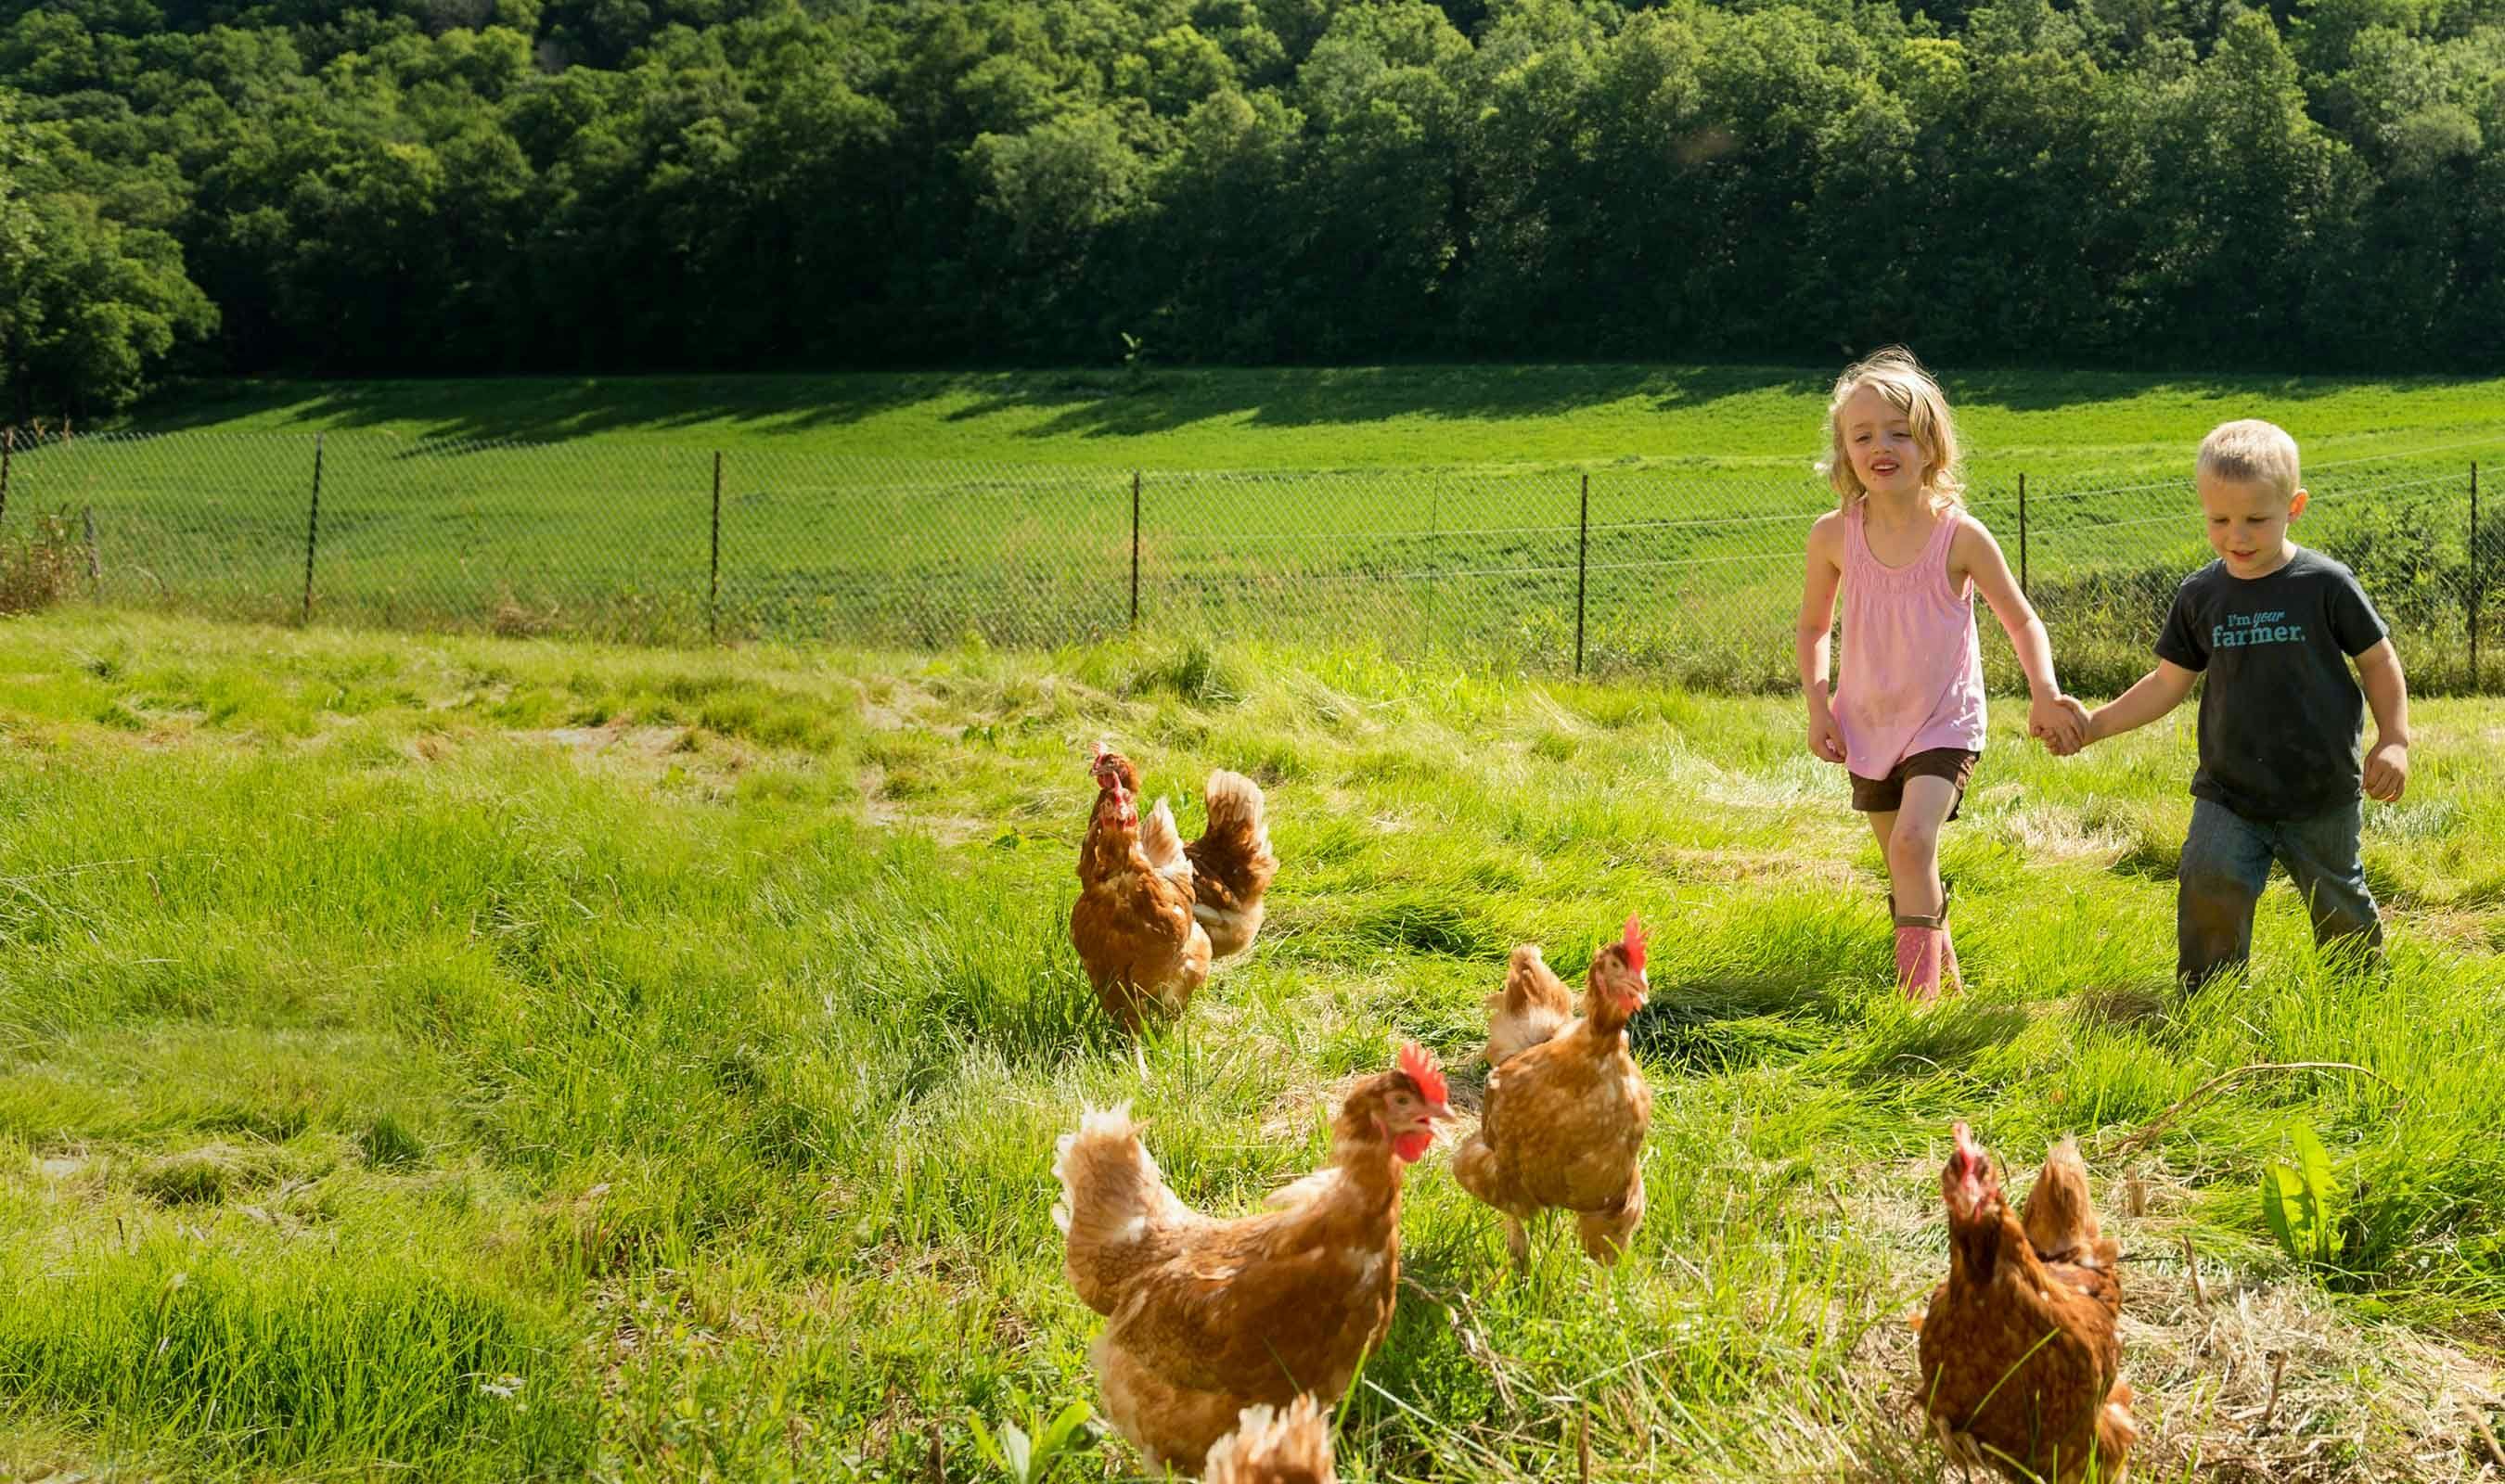 A young farm girl and boy walking in the pasture with chickens.